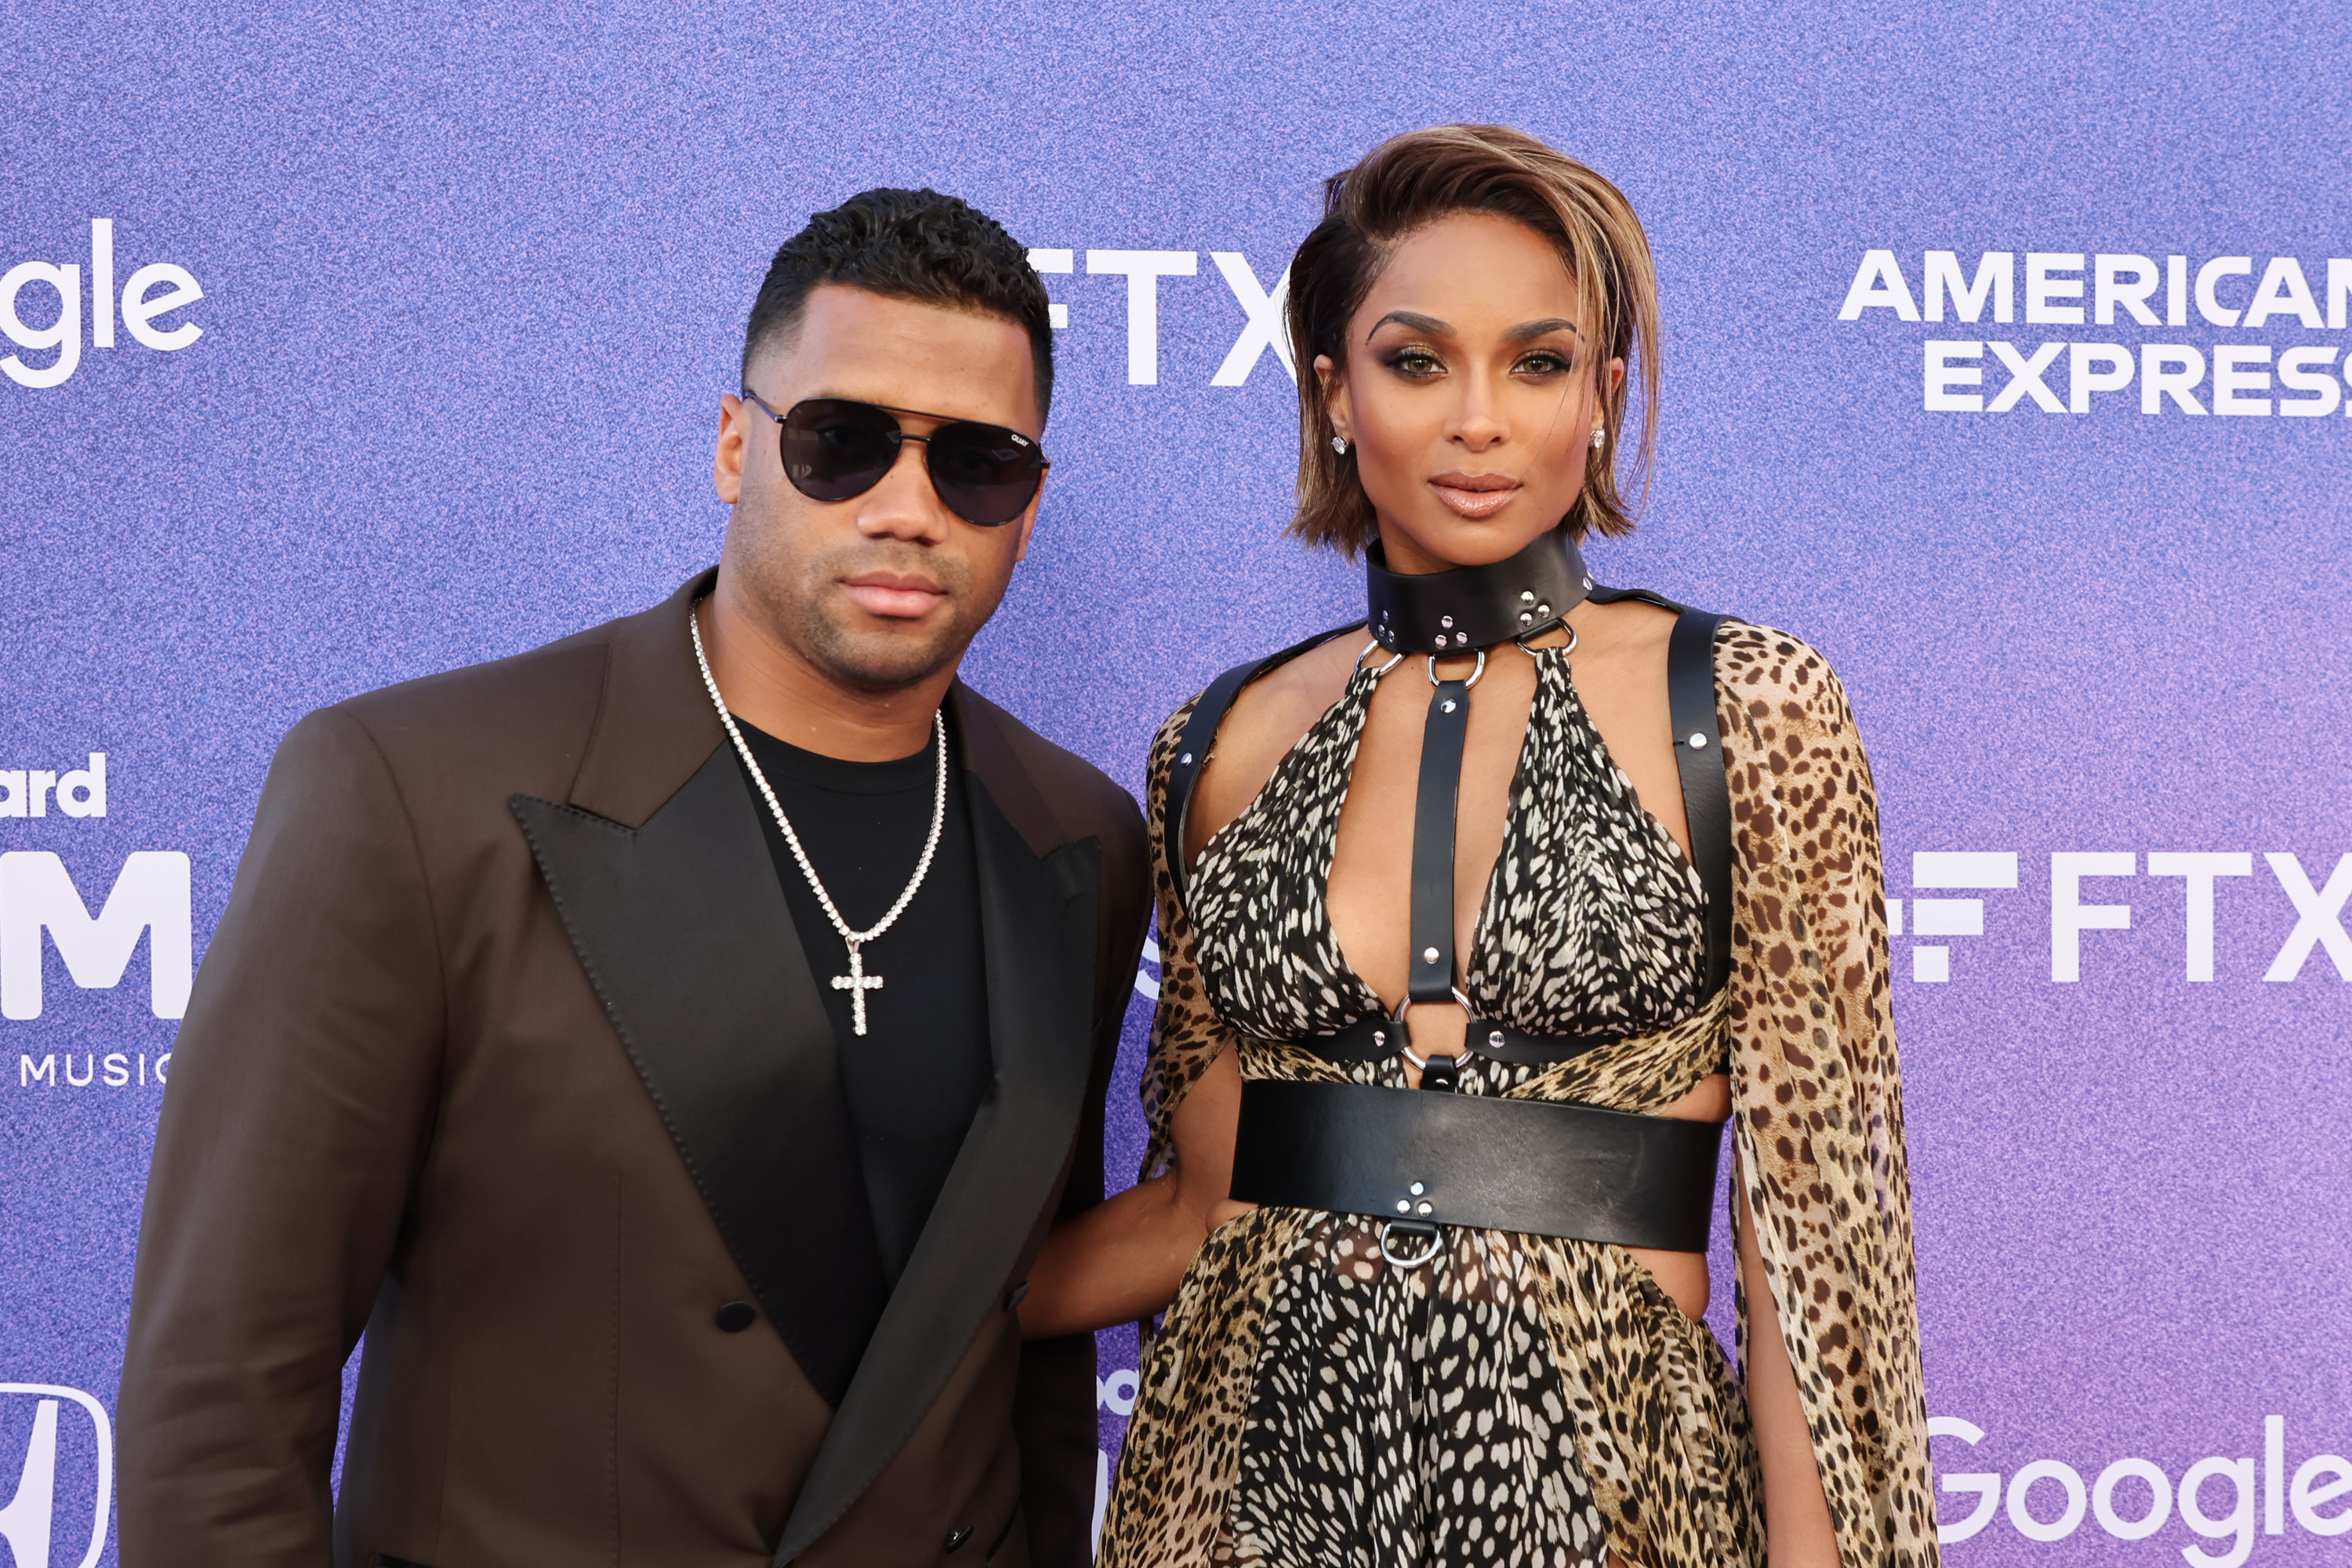 Russell and Ciara pose together at a step-and-repeat